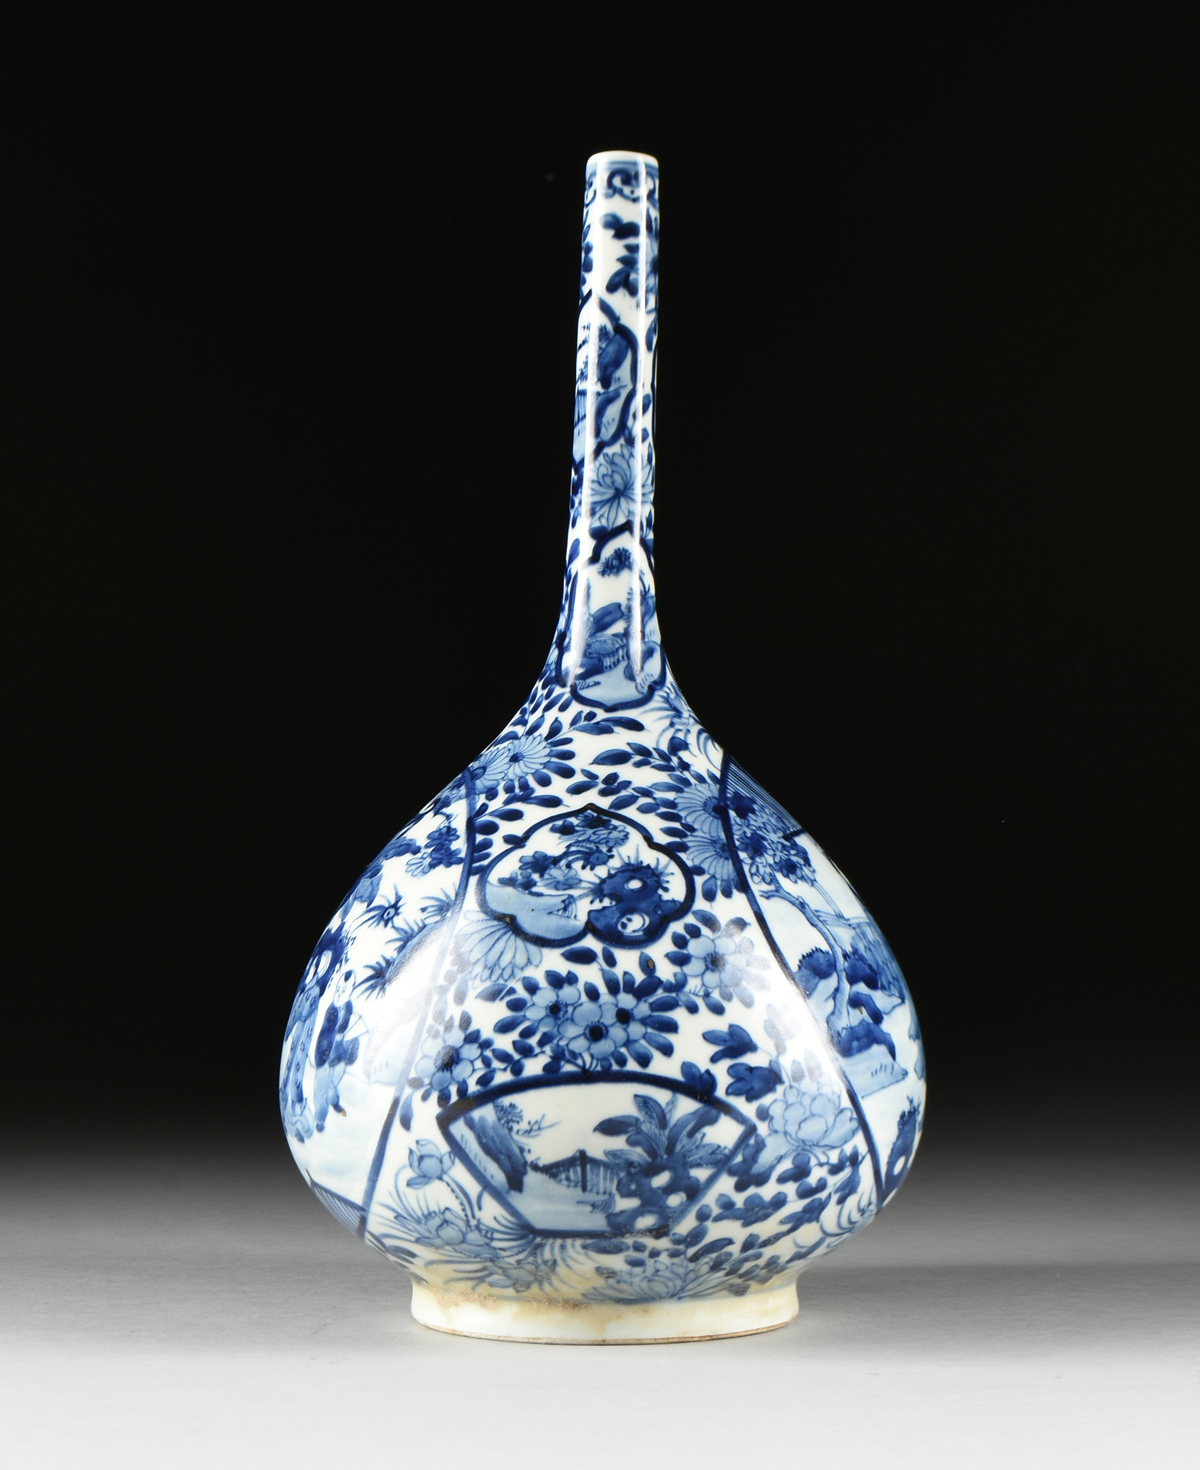 A QING DYNASTY BLUE AND WHITE PORCELAIN BOTTLE VASE, SHIPWRECK ARTIFACT, ATTRIBUTED TO THE KANGXI - Image 6 of 8